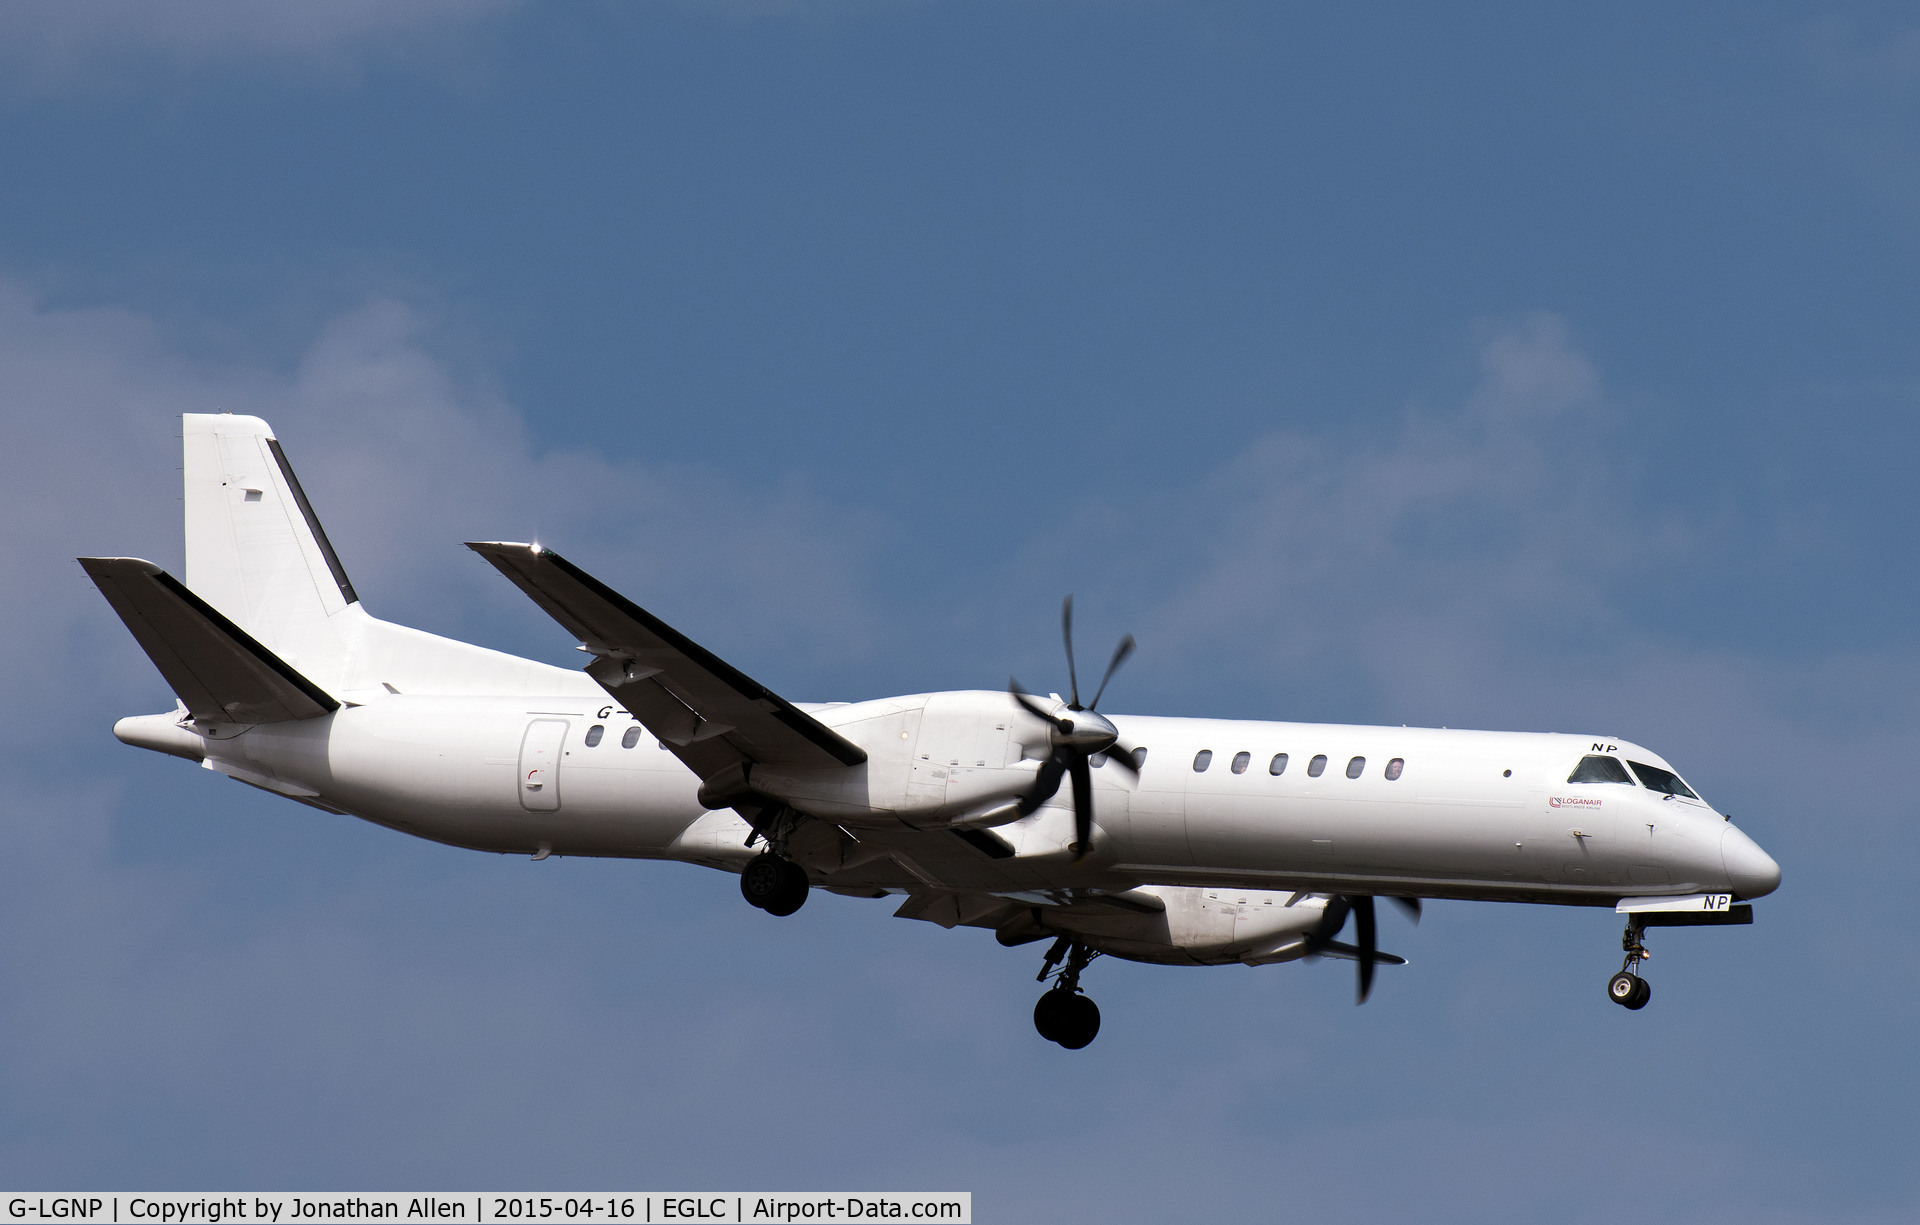 G-LGNP, 1995 Saab 2000 C/N 2000-018, On approach to London City Airport.